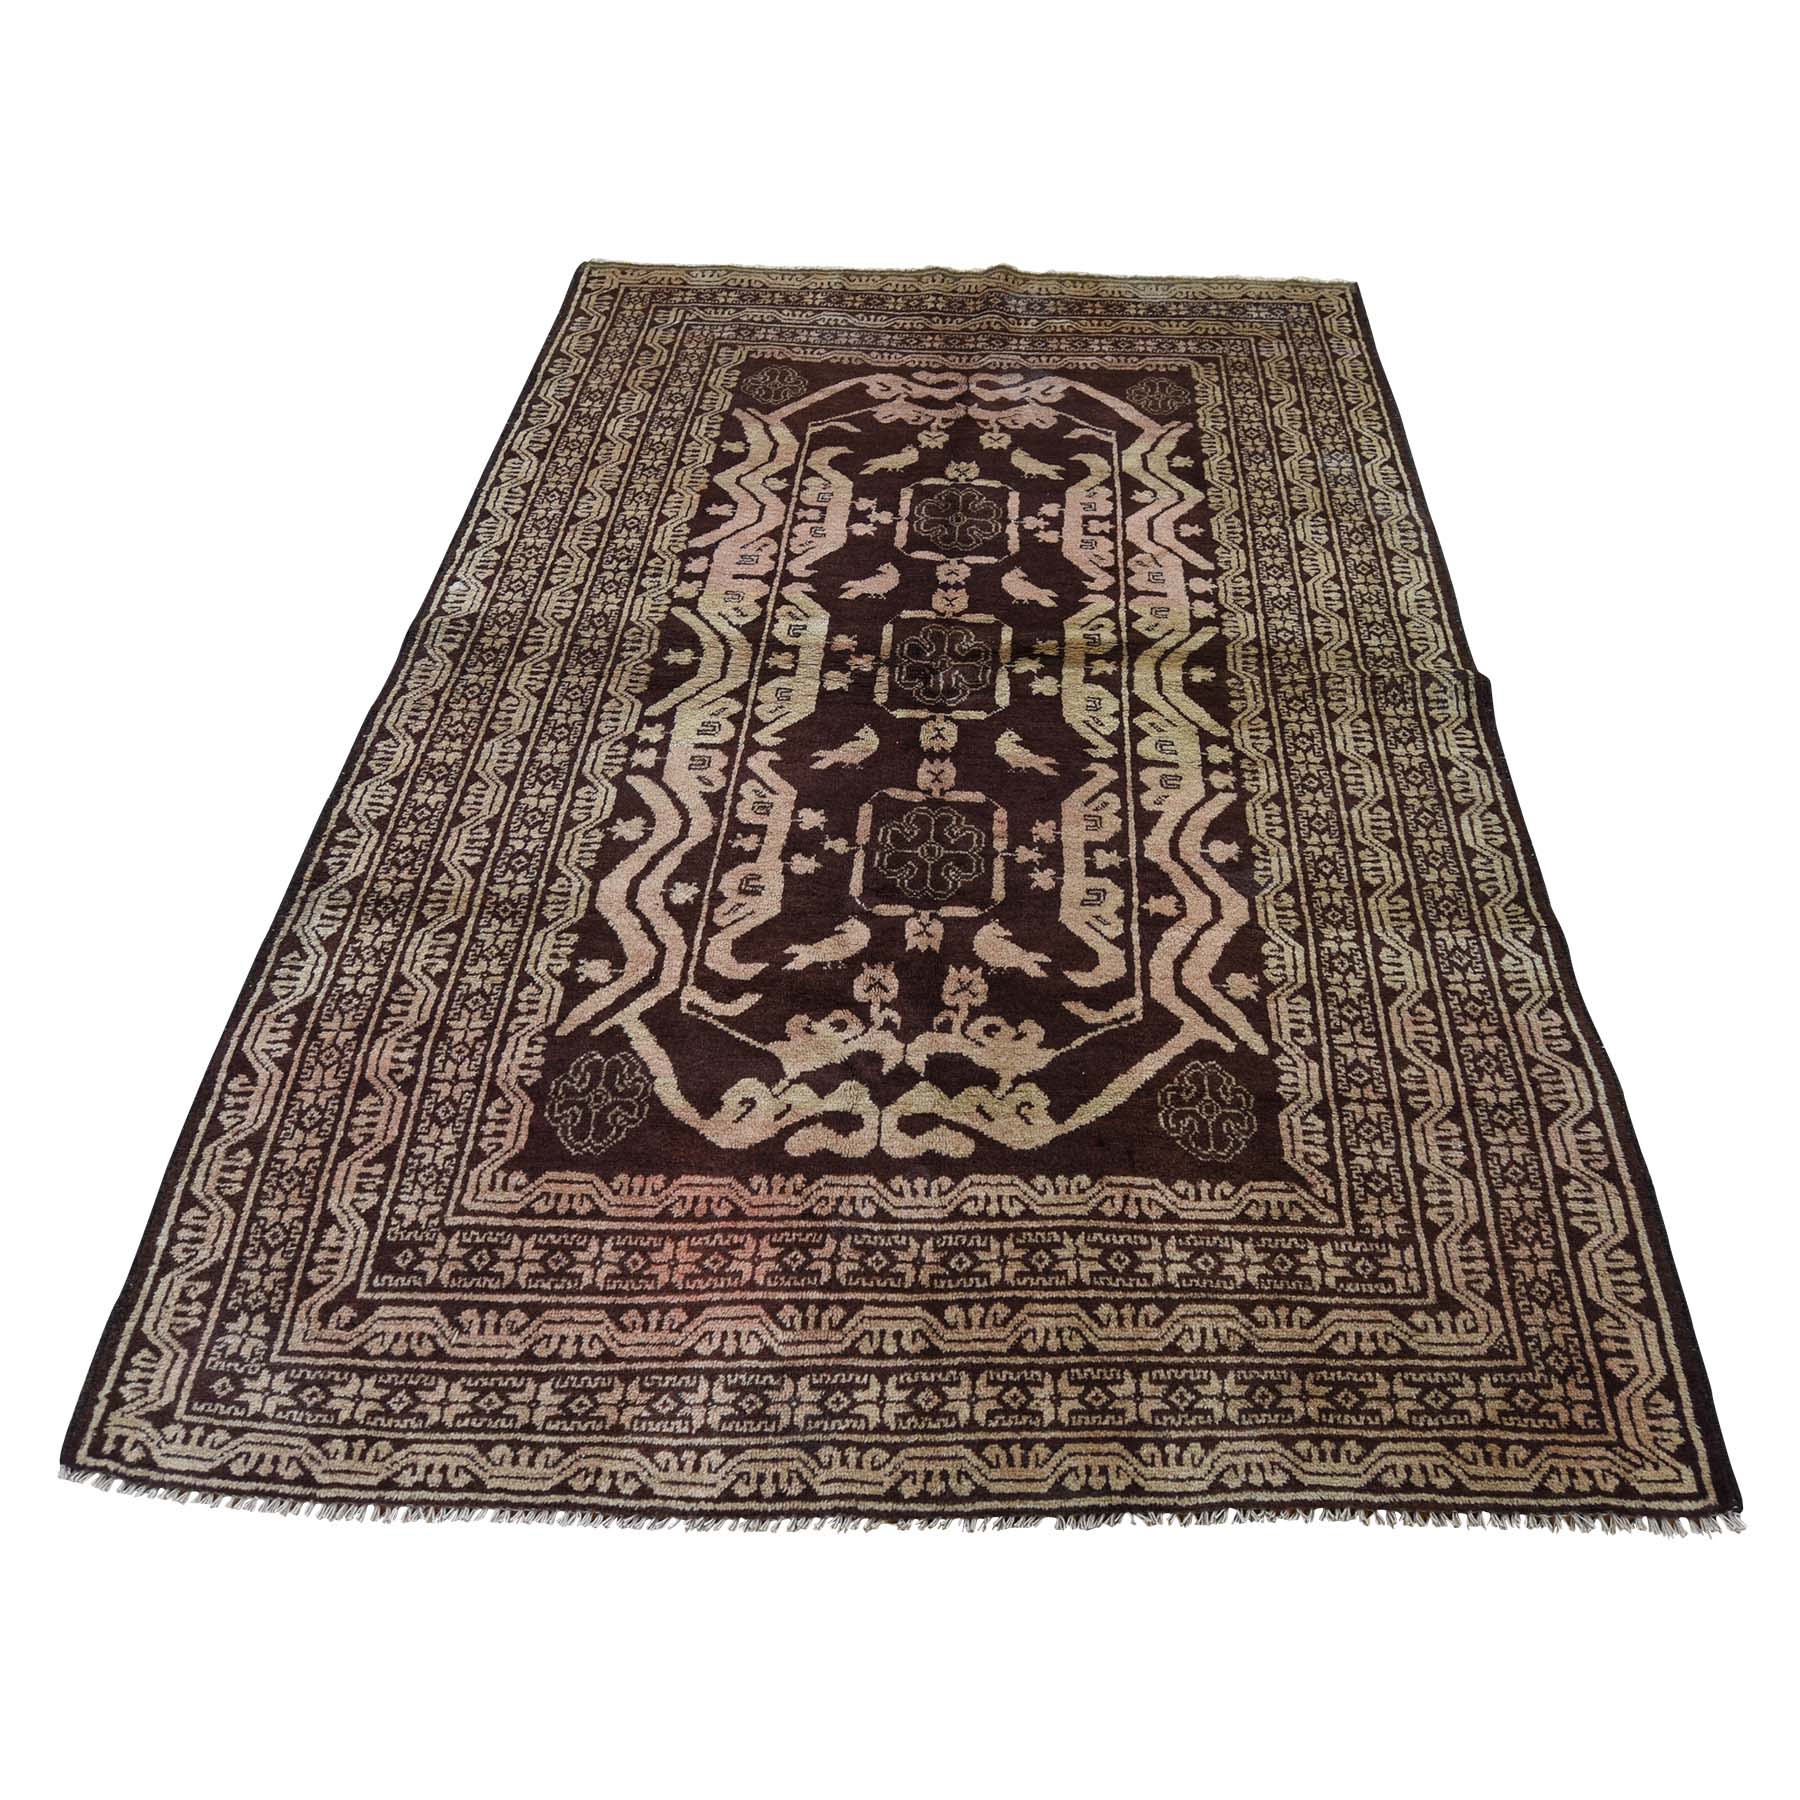 4'1"x6'9" Pure Wool Afghan Baluch Washed Out Color With Birds Hand Woven Oriental Rug 